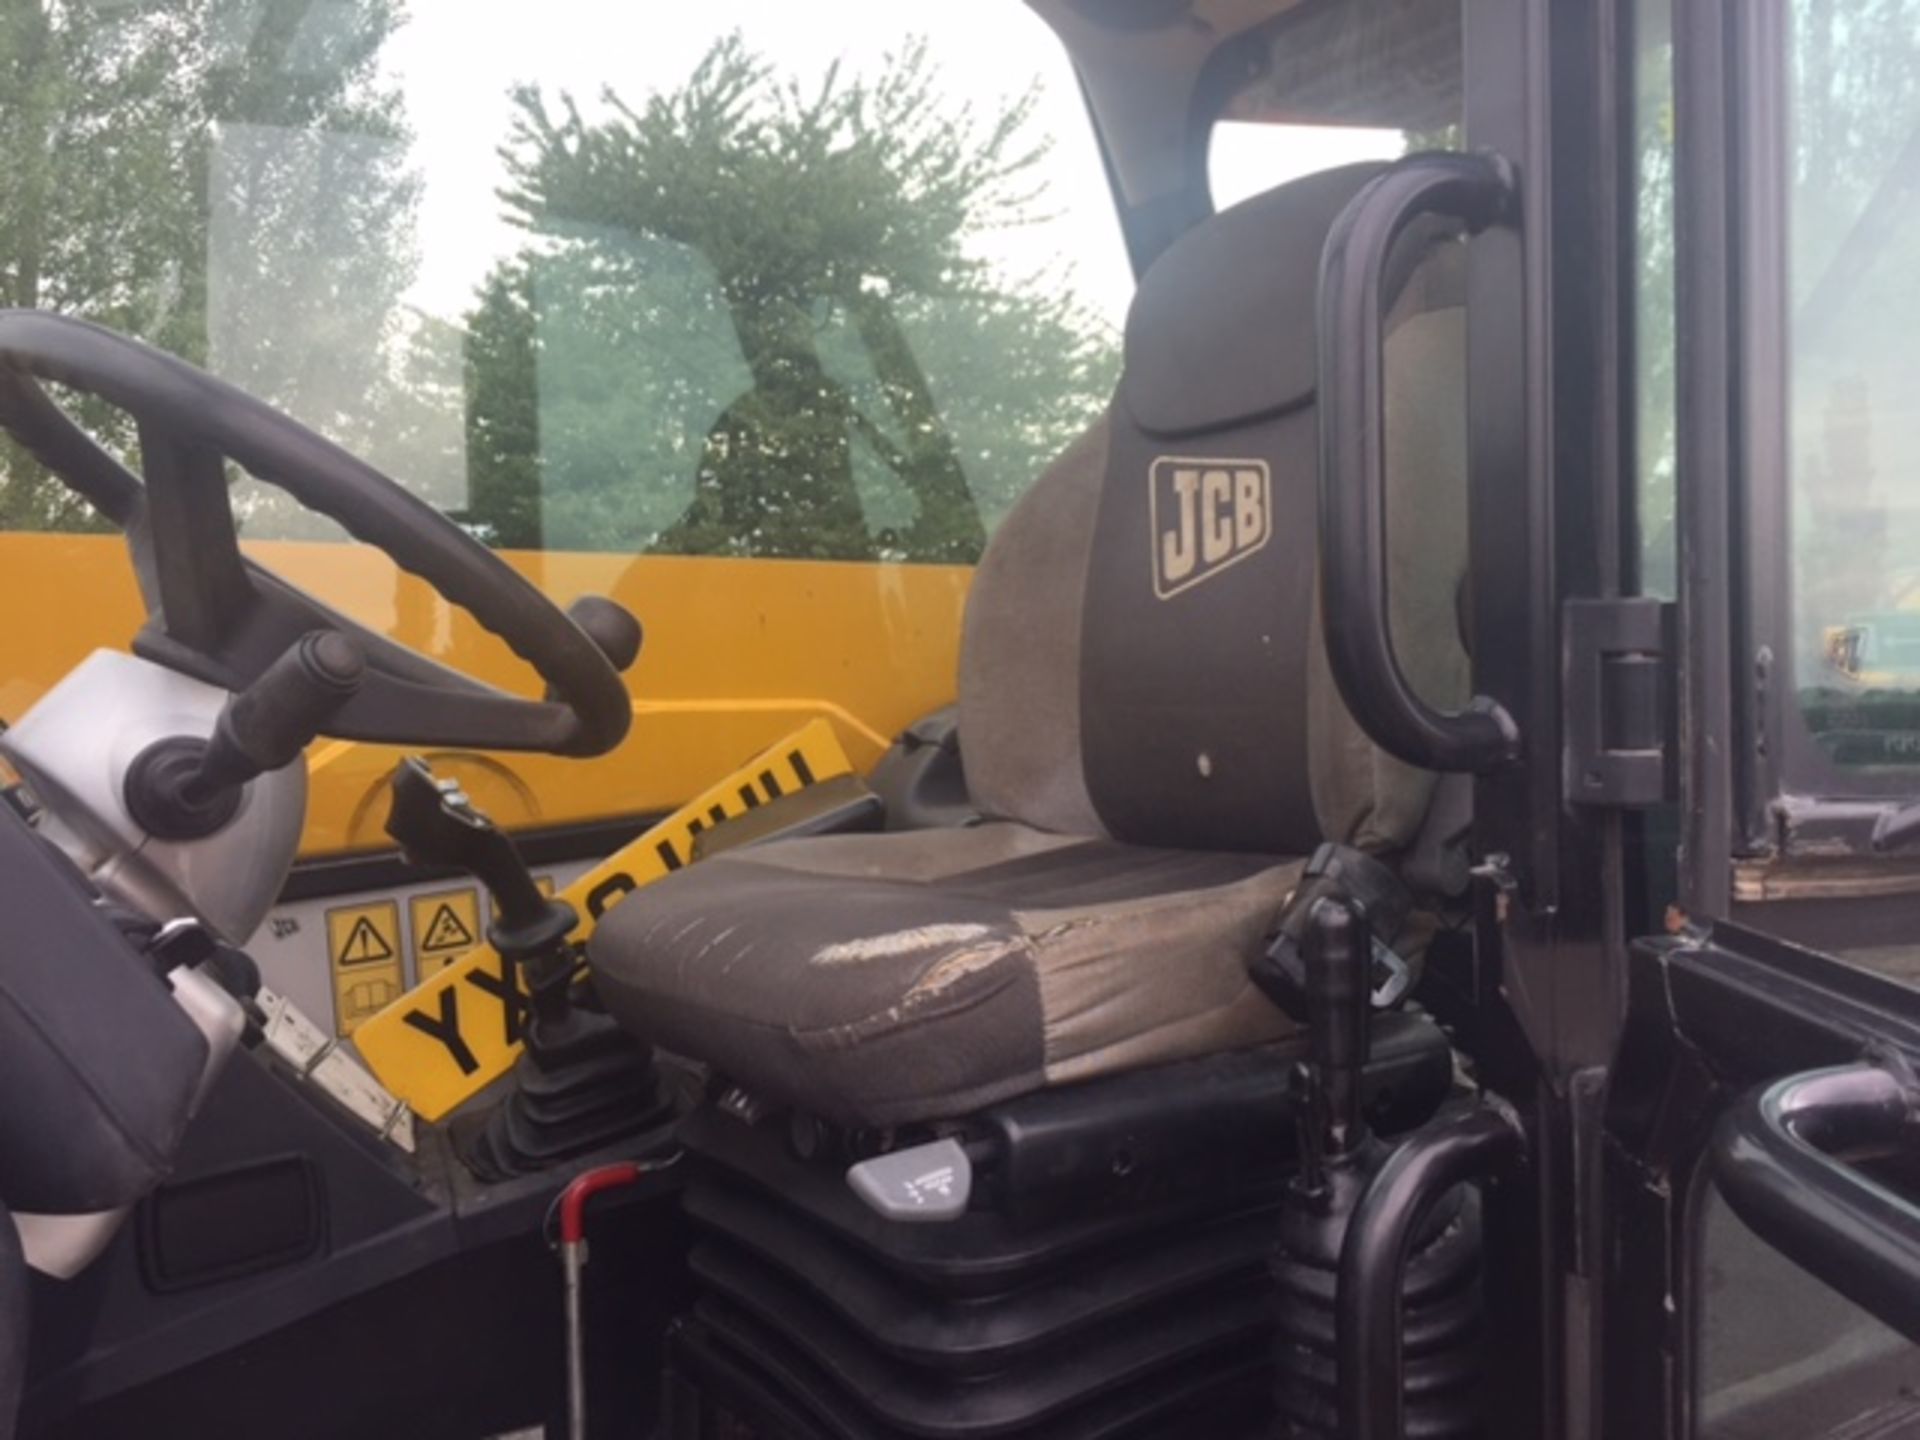 2009 JCB 541-70 Farm Special Agri Plus Telehandler, PUH with Air Con and Pallet Tines. V5 will be - Image 4 of 4